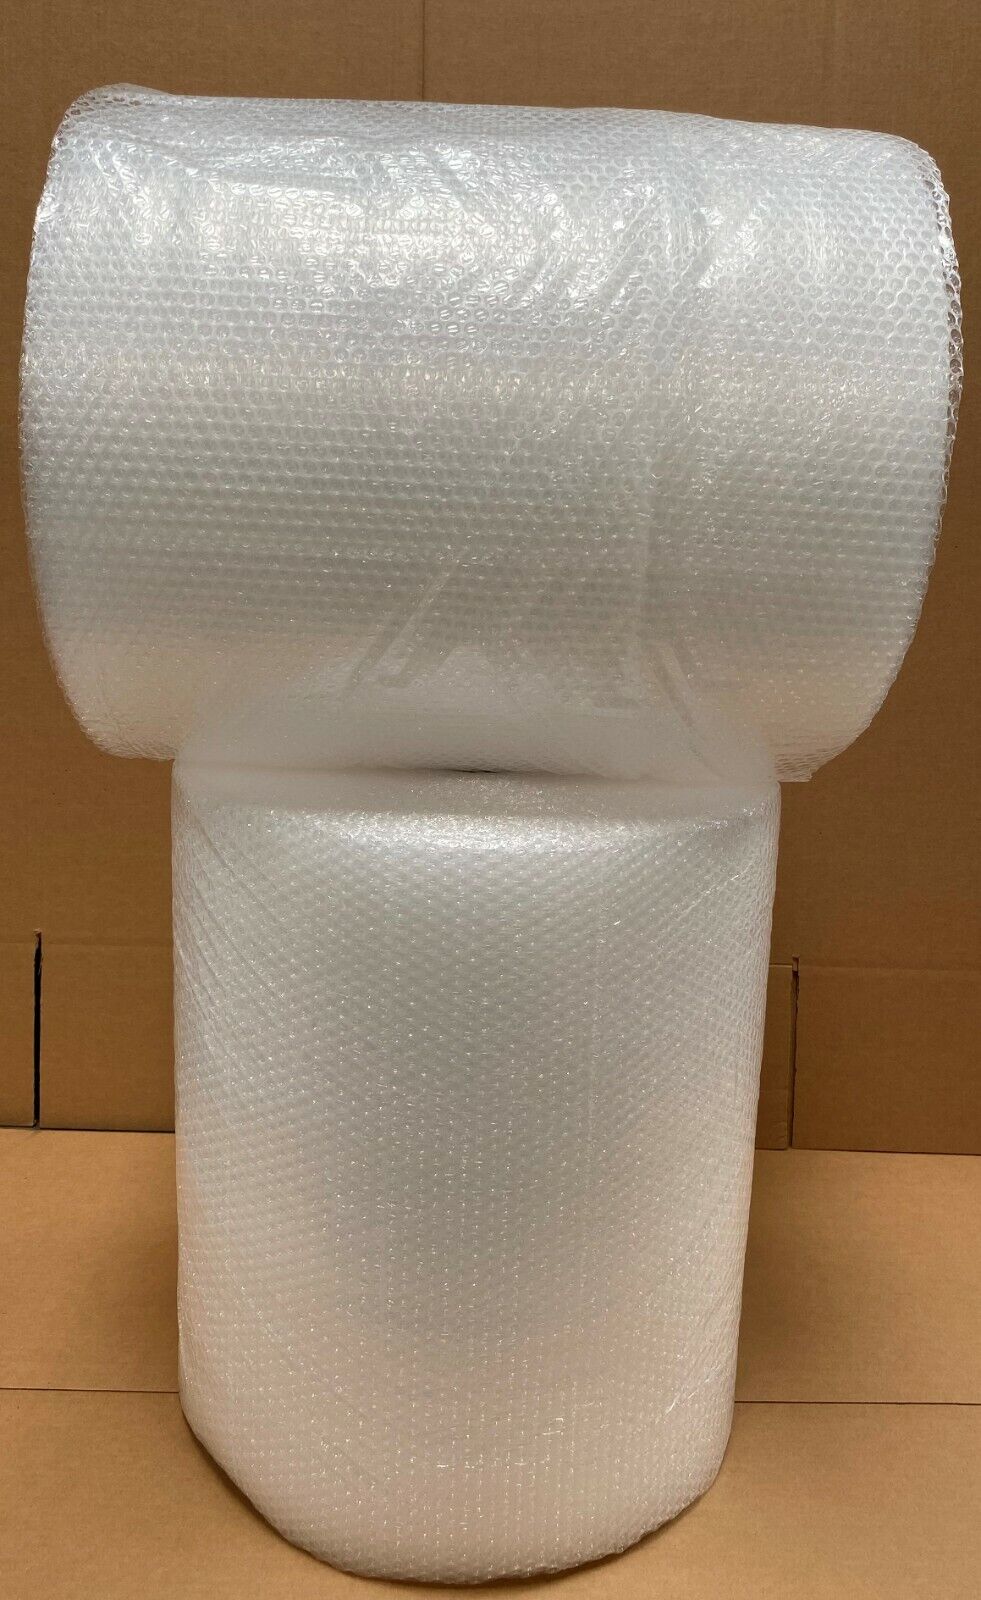 3/16"x 24" Small Bubbles Packing Roll Perforated 700ft bubble Mailing / Shipping